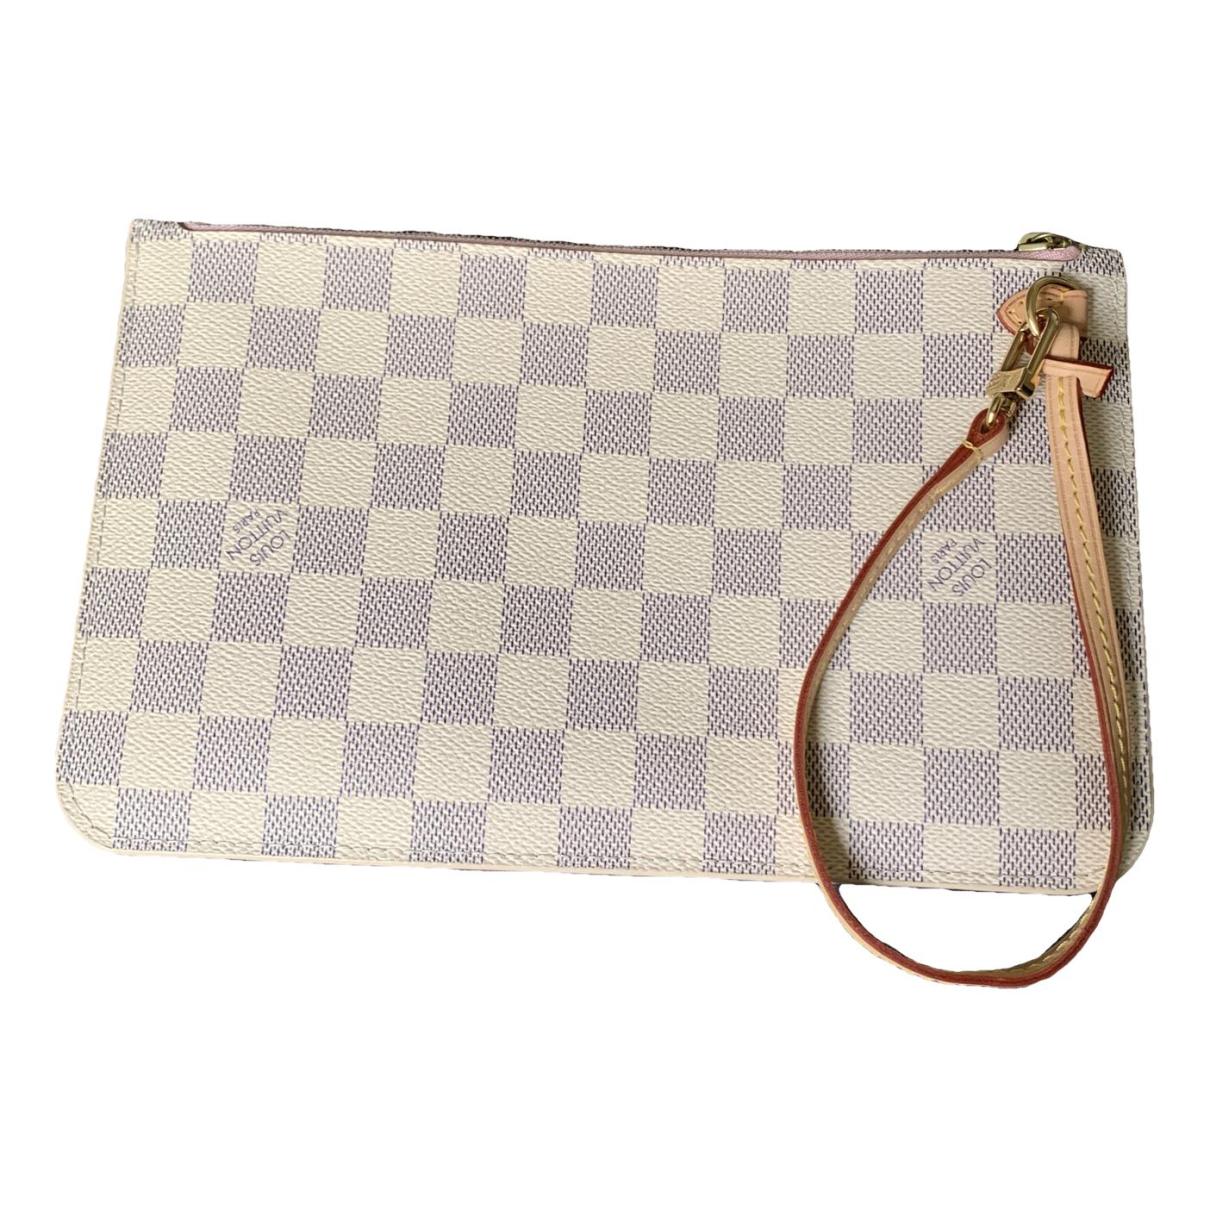 Neverfull leather clutch bag